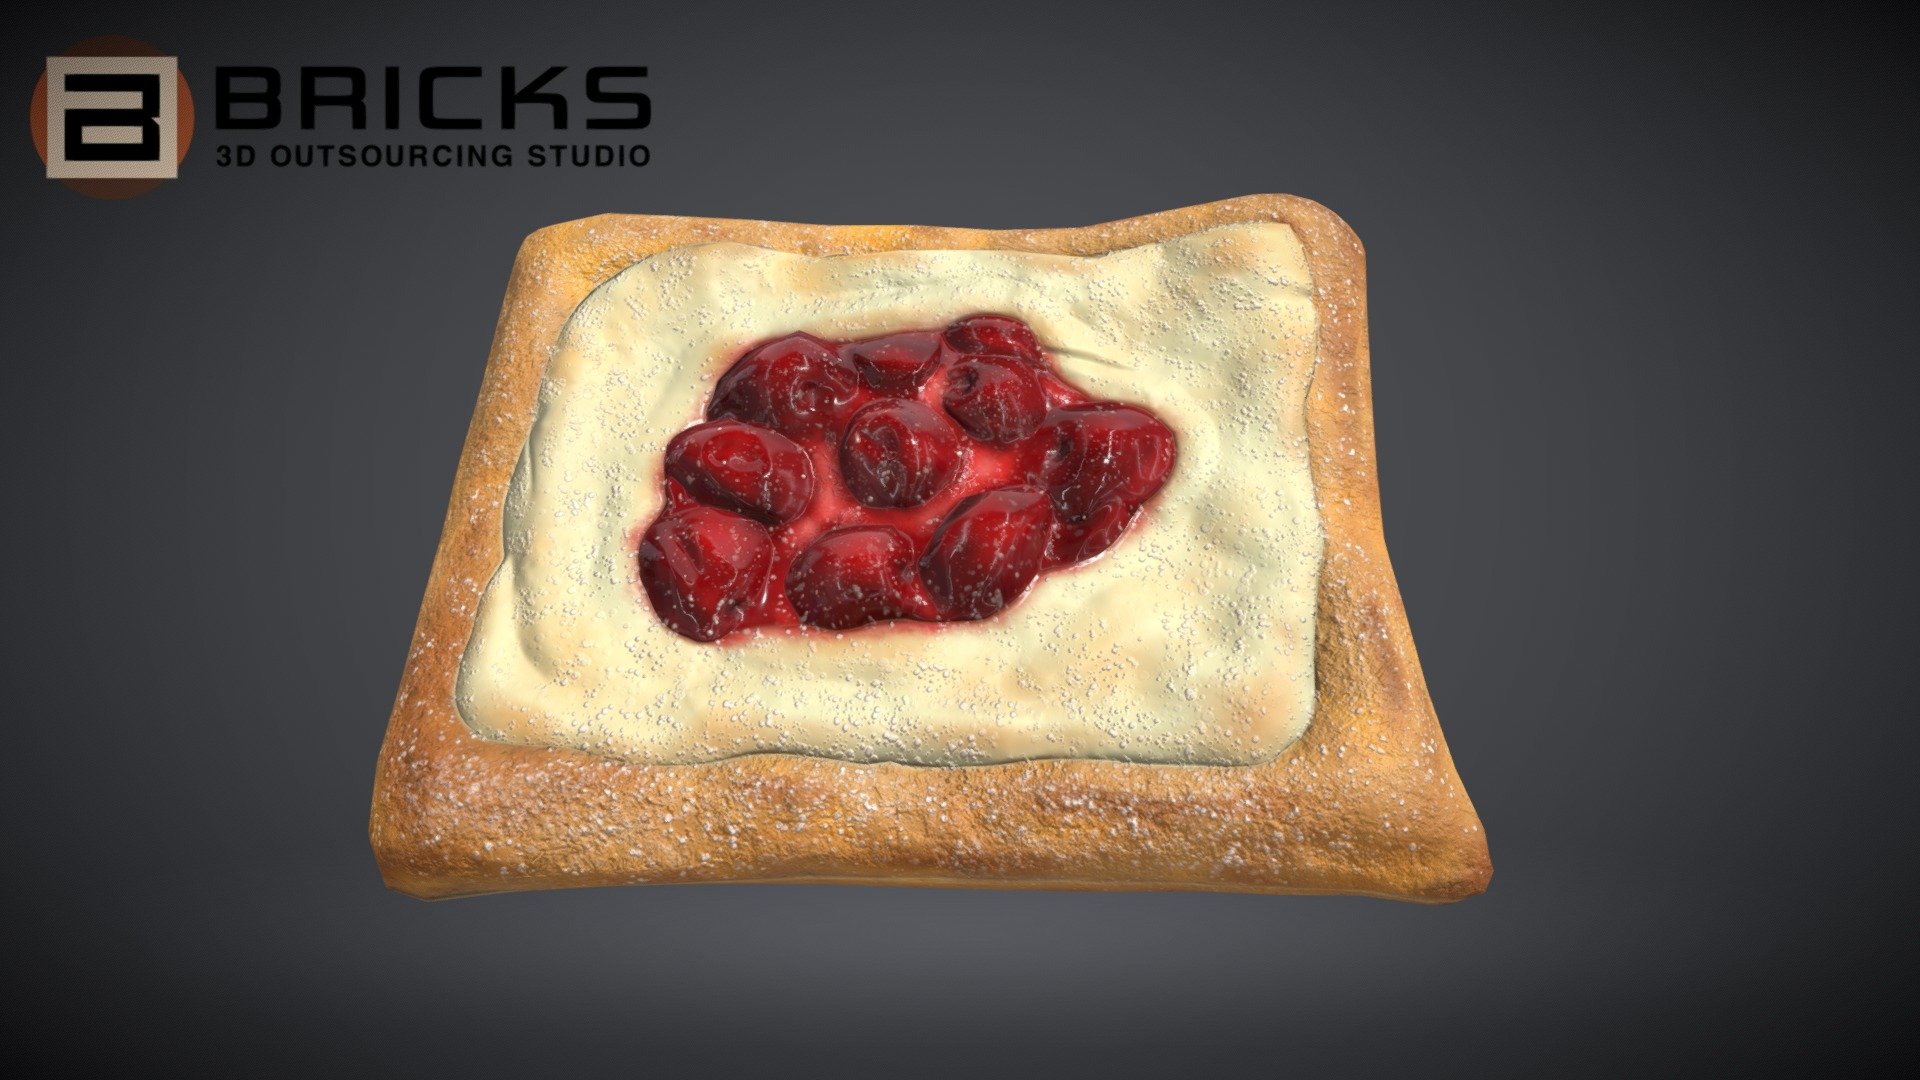 PBR Food Asset:
DanishPastry
Polycount: 1140
Vertex count: 651
Texture Size: 2048px x 2048px
Normal: OpenGL

If you need any adjust in file please contact us: team@bricks3dstudio.com

Hire us: tringuyen@bricks3dstudio.com
Here is us: https://www.bricks3dstudio.com/
        https://www.artstation.com/bricksstudio
        https://www.facebook.com/Bricks3dstudio/
        https://www.linkedin.com/in/bricks-studio-b10462252/ - Danish Pastry - Buy Royalty Free 3D model by Bricks Studio (@bricks3dstudio) 3d model